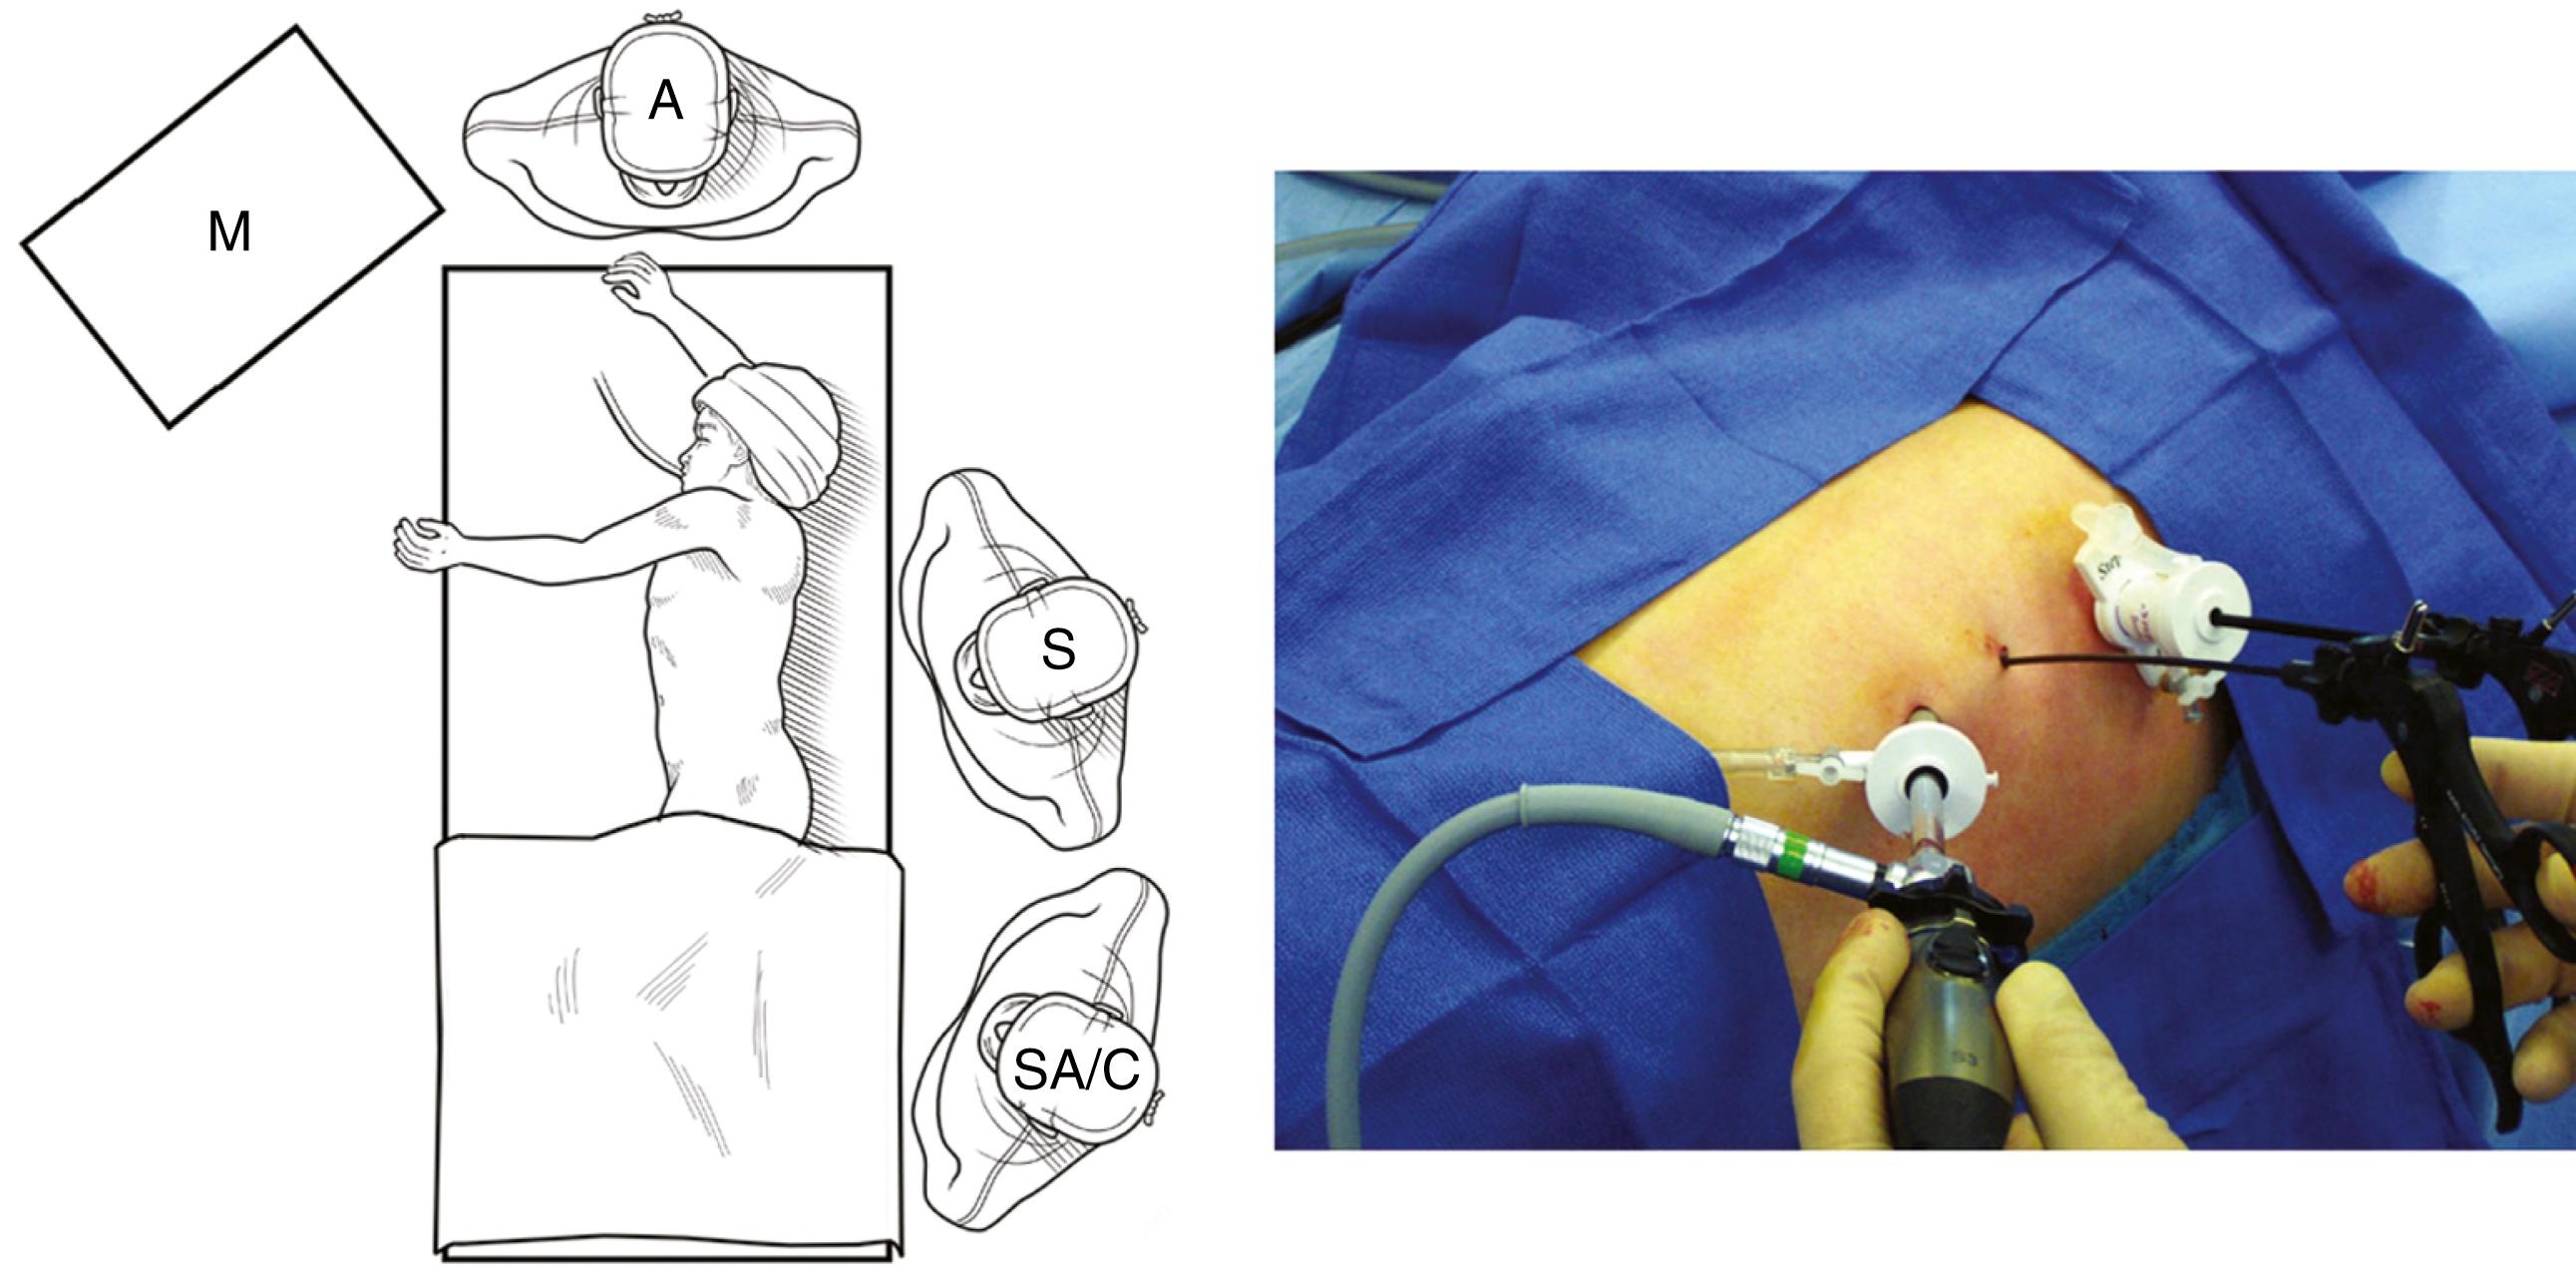 Fig. 36-3, For biopsy of a mediastinal mass, whether in the anterior, posterior, or middle mediastinum, the surgeon (S) and surgical assistant/camera holder (SA/C) stand at the patient’s back, with the monitor (M) positioned opposite them. For biopsy of a middle mediastinal mass, as is being performed in the photograph, a 5-mm valved cannula is introduced in the fourth or fifth intercostal space in the midaxillary line. After insufflation, additional 5-mm valved ports or instruments introduced through stab incisions are placed between the anterior and posterior axillary lines to triangulate the lesion. An angled telescope is used. A, anesthesiologist.